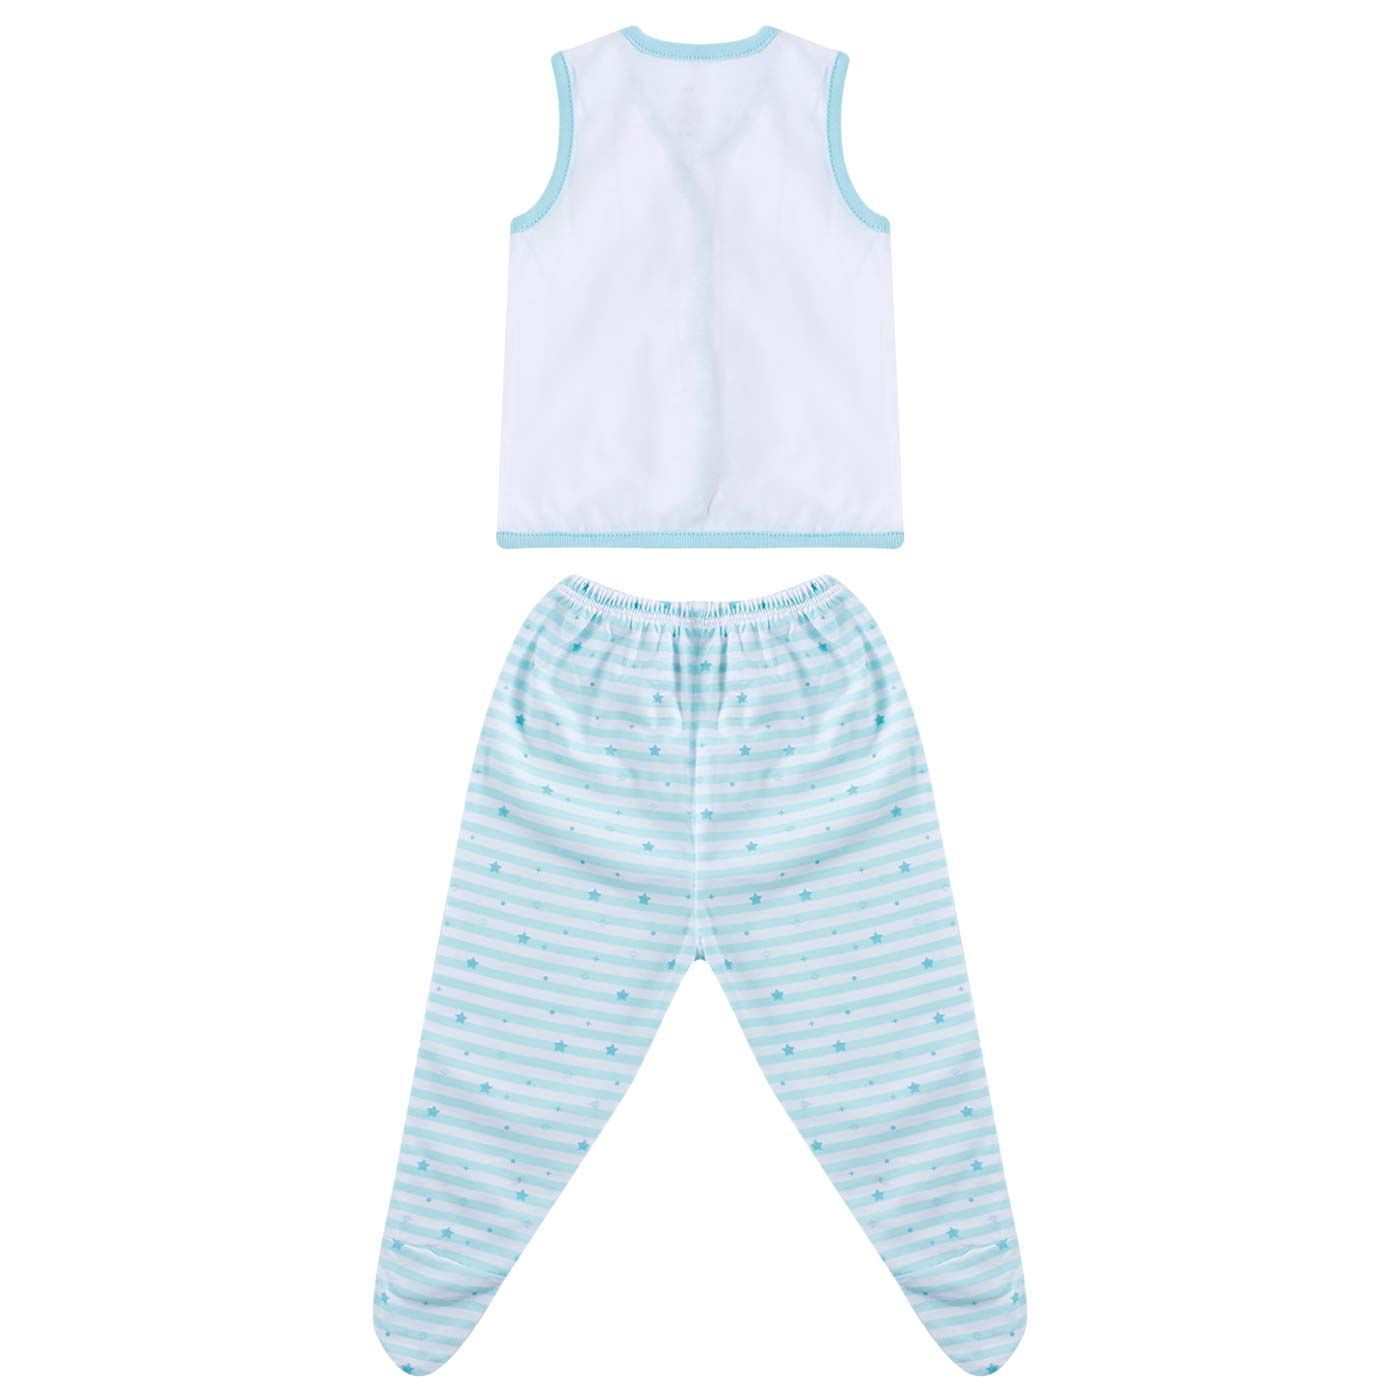 Boogybaby Sleeveless&Closed Trousers Girl-NB Stadust (Isi 3) - 7